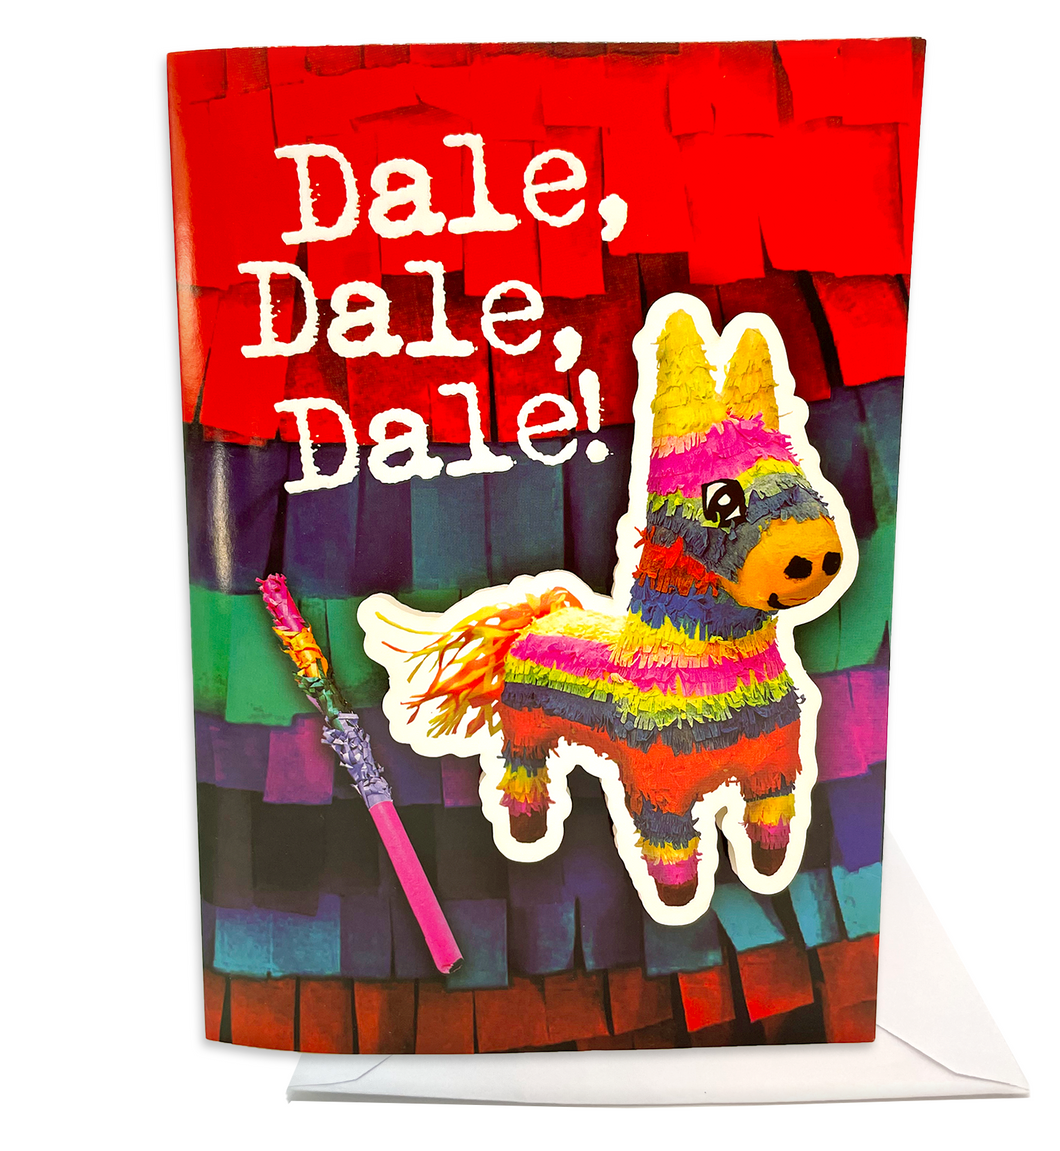 Musical Greeting Card - Dale, Dale, Dale! (The Piñata Song) - 